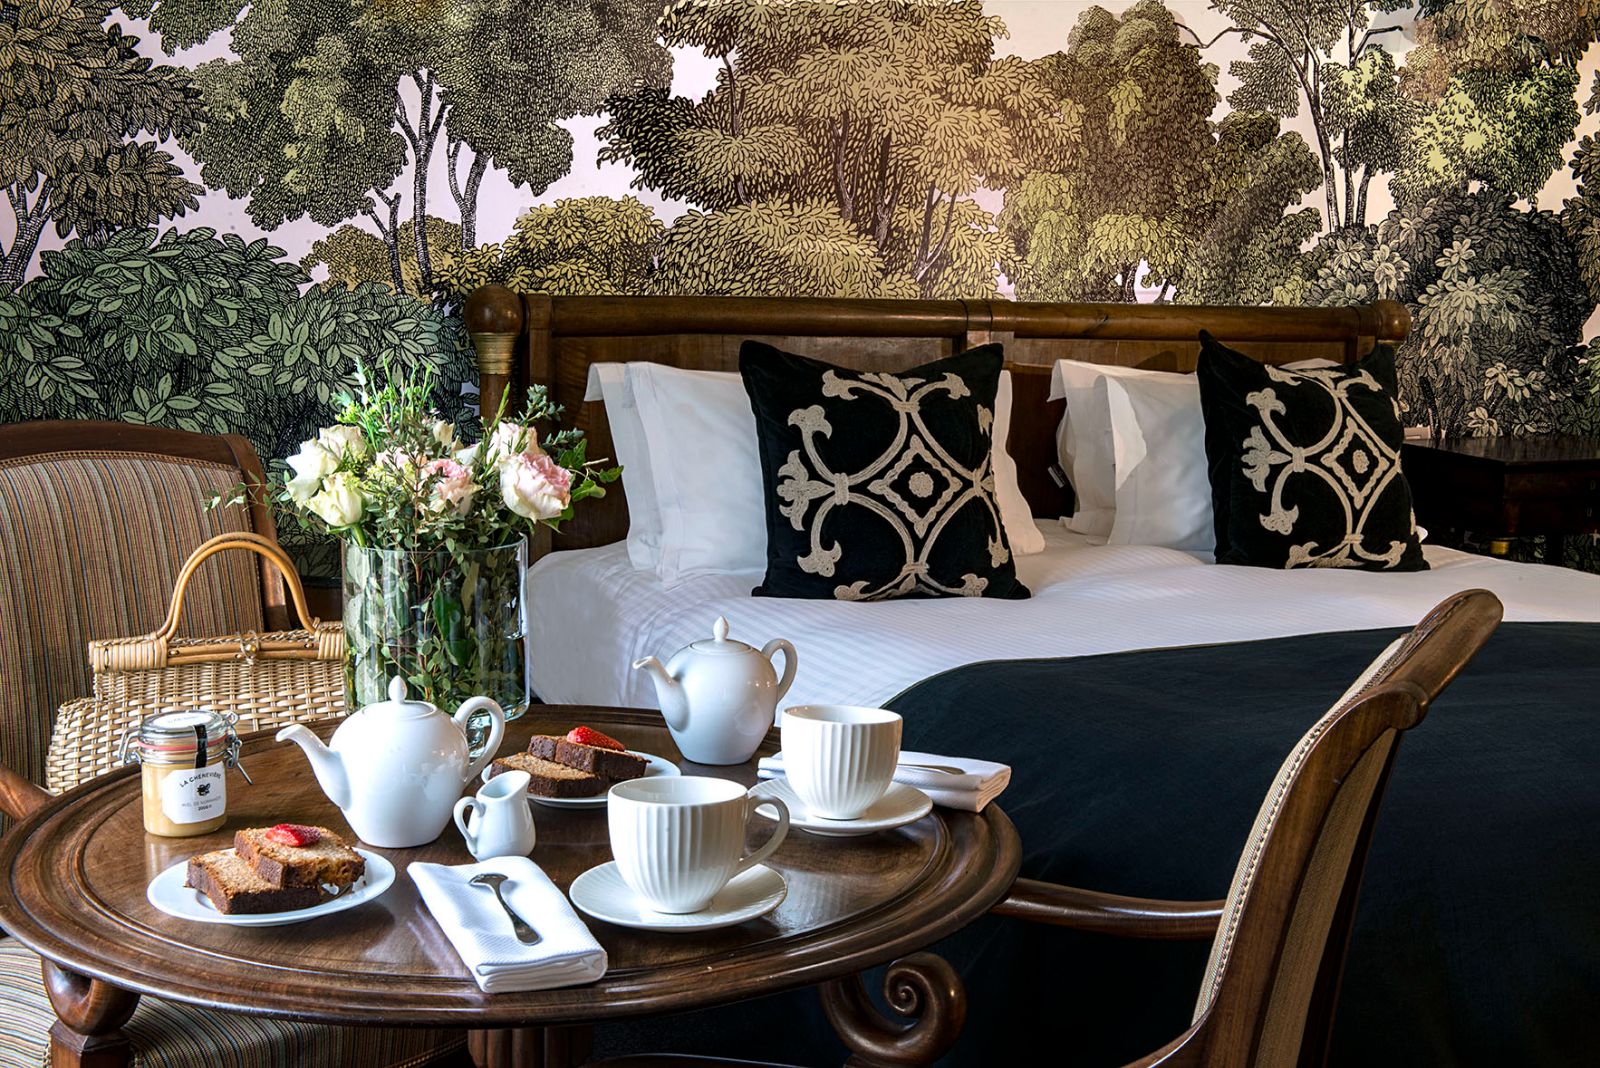 Breakfast in bed at Chateau La Cheneviere in the Normandy region of France